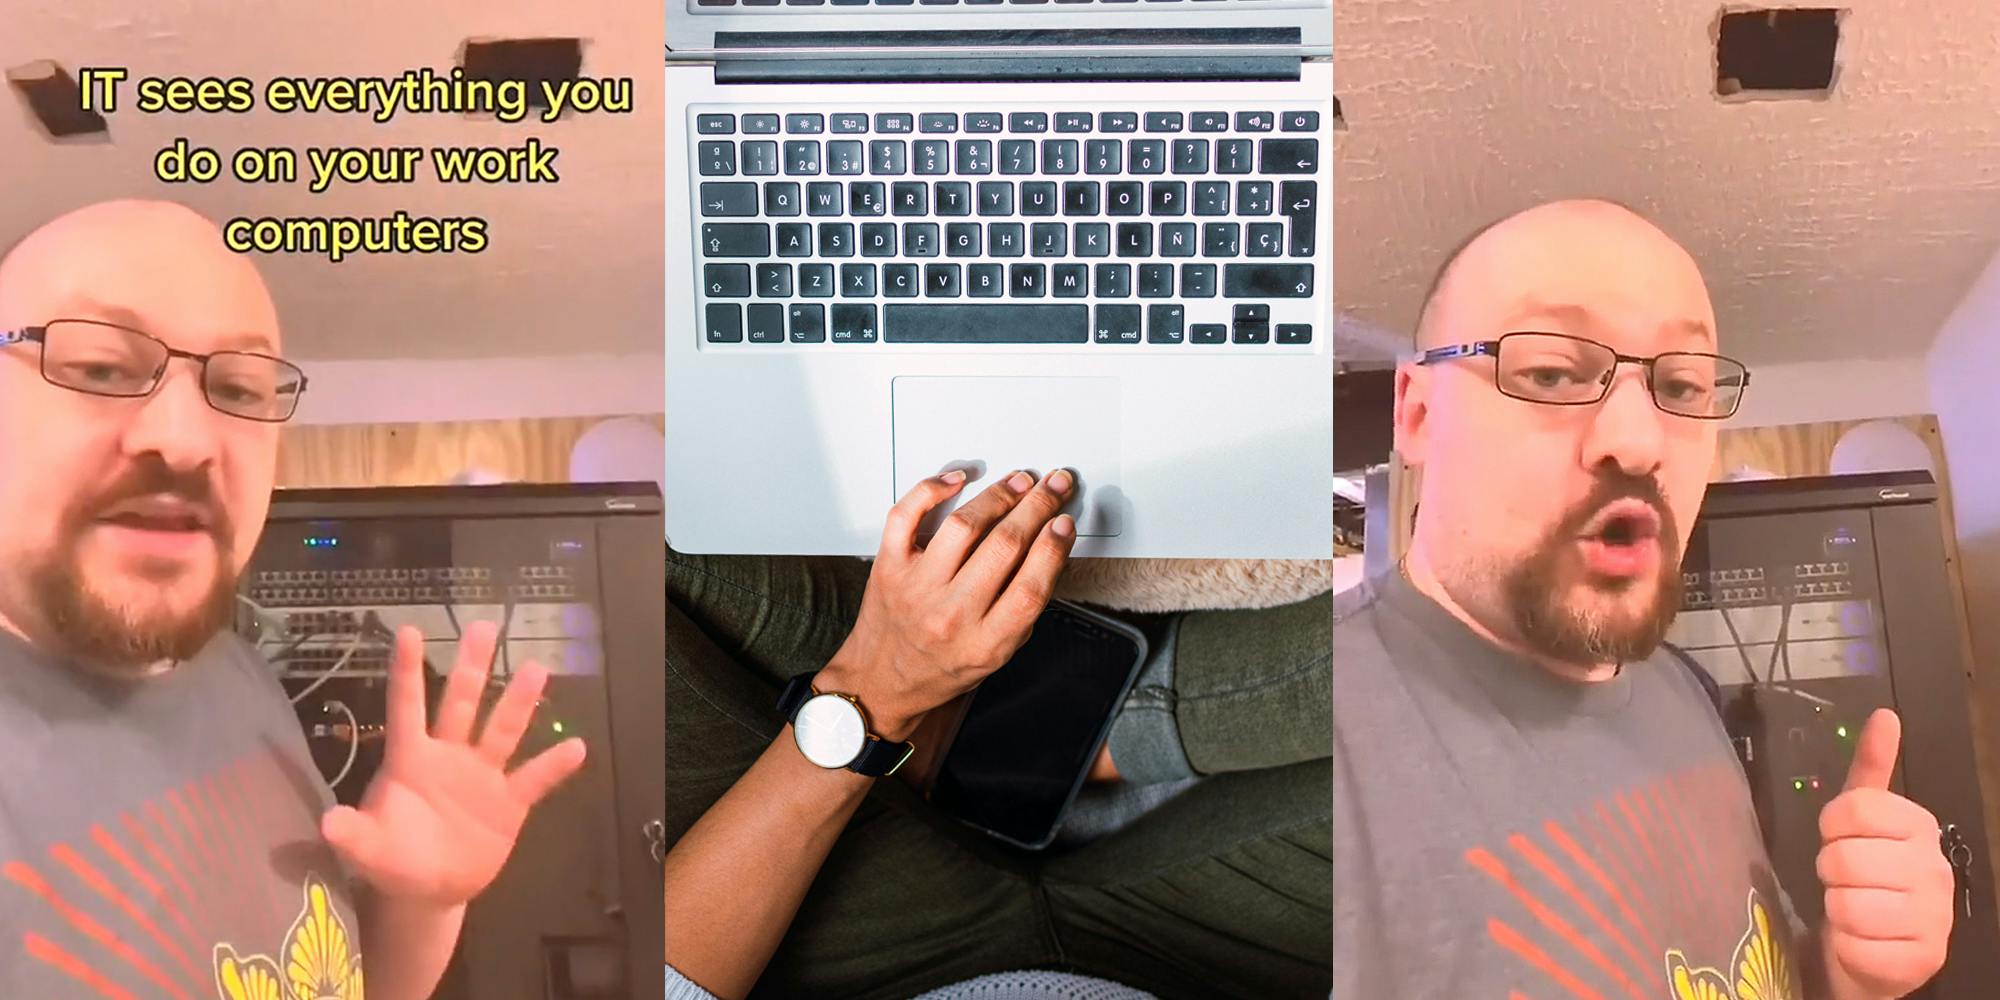 Man speaking in front of IT tech with hand out caption "IT sees everything you do on your work computers" (l) man sitting on couch hand on laptop (c) man speaking in front of IT tech with thumb up (r)